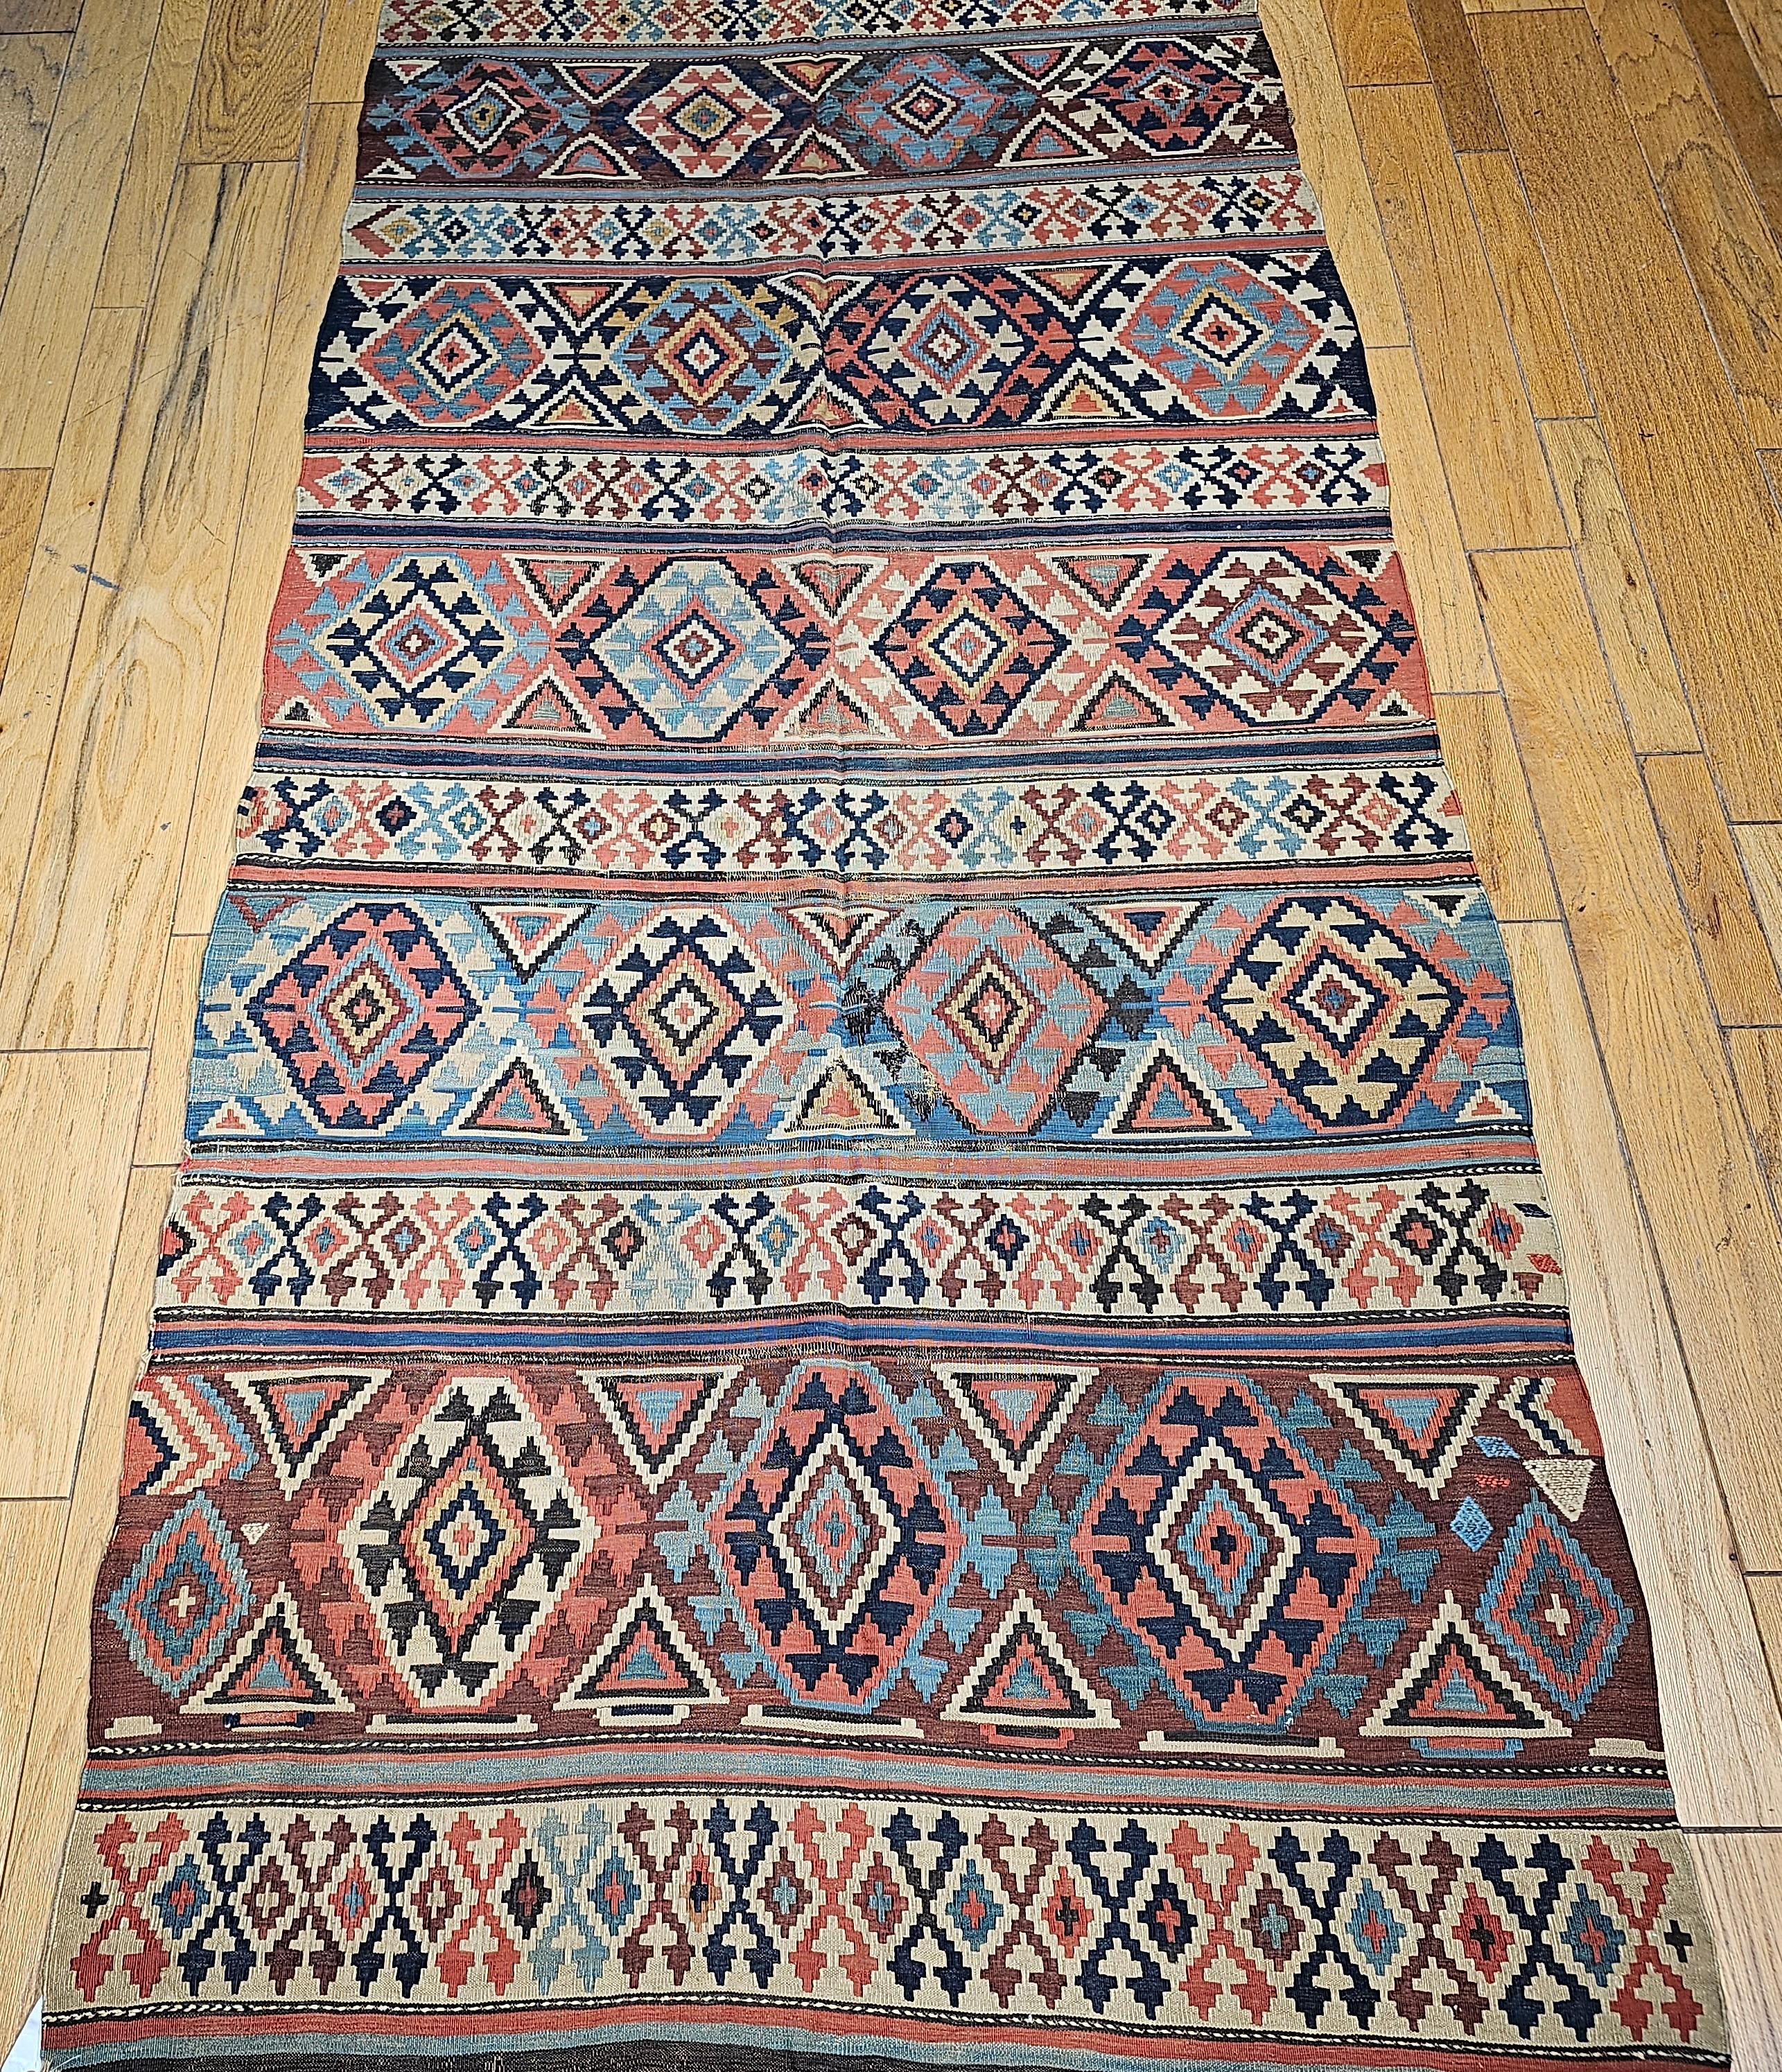 19th Century Caucasian Kazak kilim in ivory, rust, green, blue, and navy. Since Kilims are tapestry type flatweaves (no pile), finding one that is over 125 years in such a great condition is extremely rare. This Caucasian Kilim is a stripe pattern